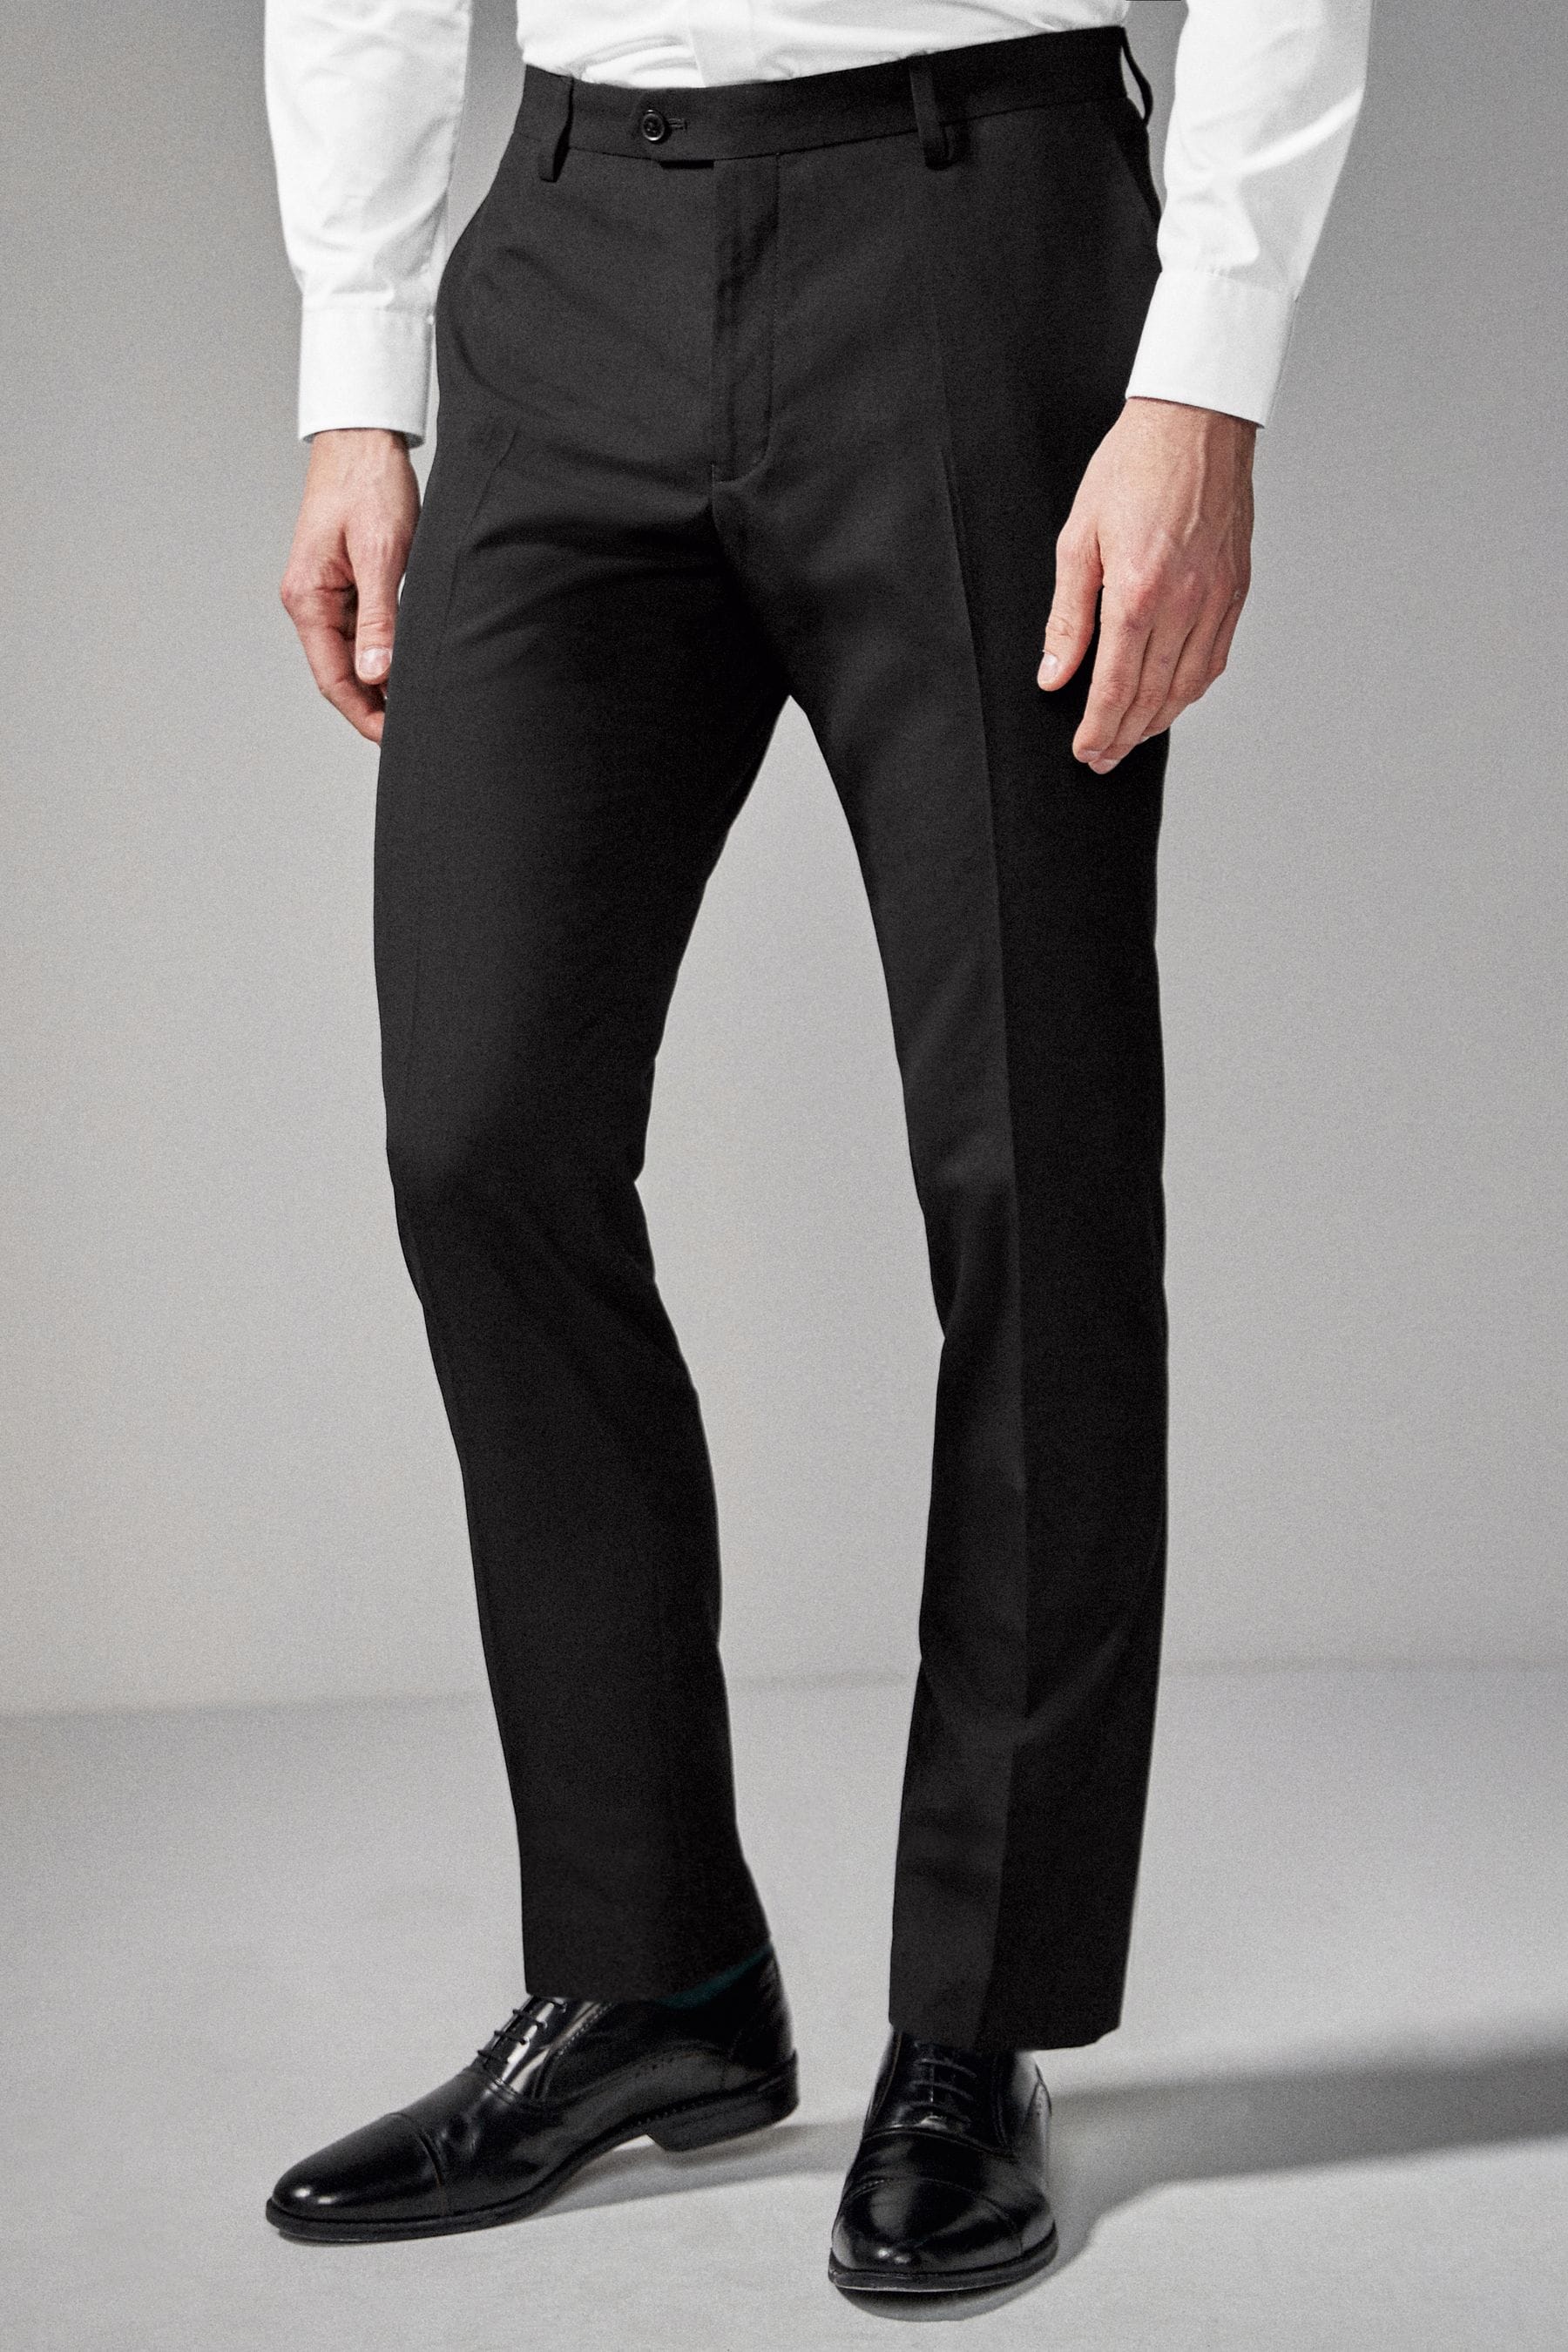 Buy Black Slim Suit Trousers from the Next UK online shop